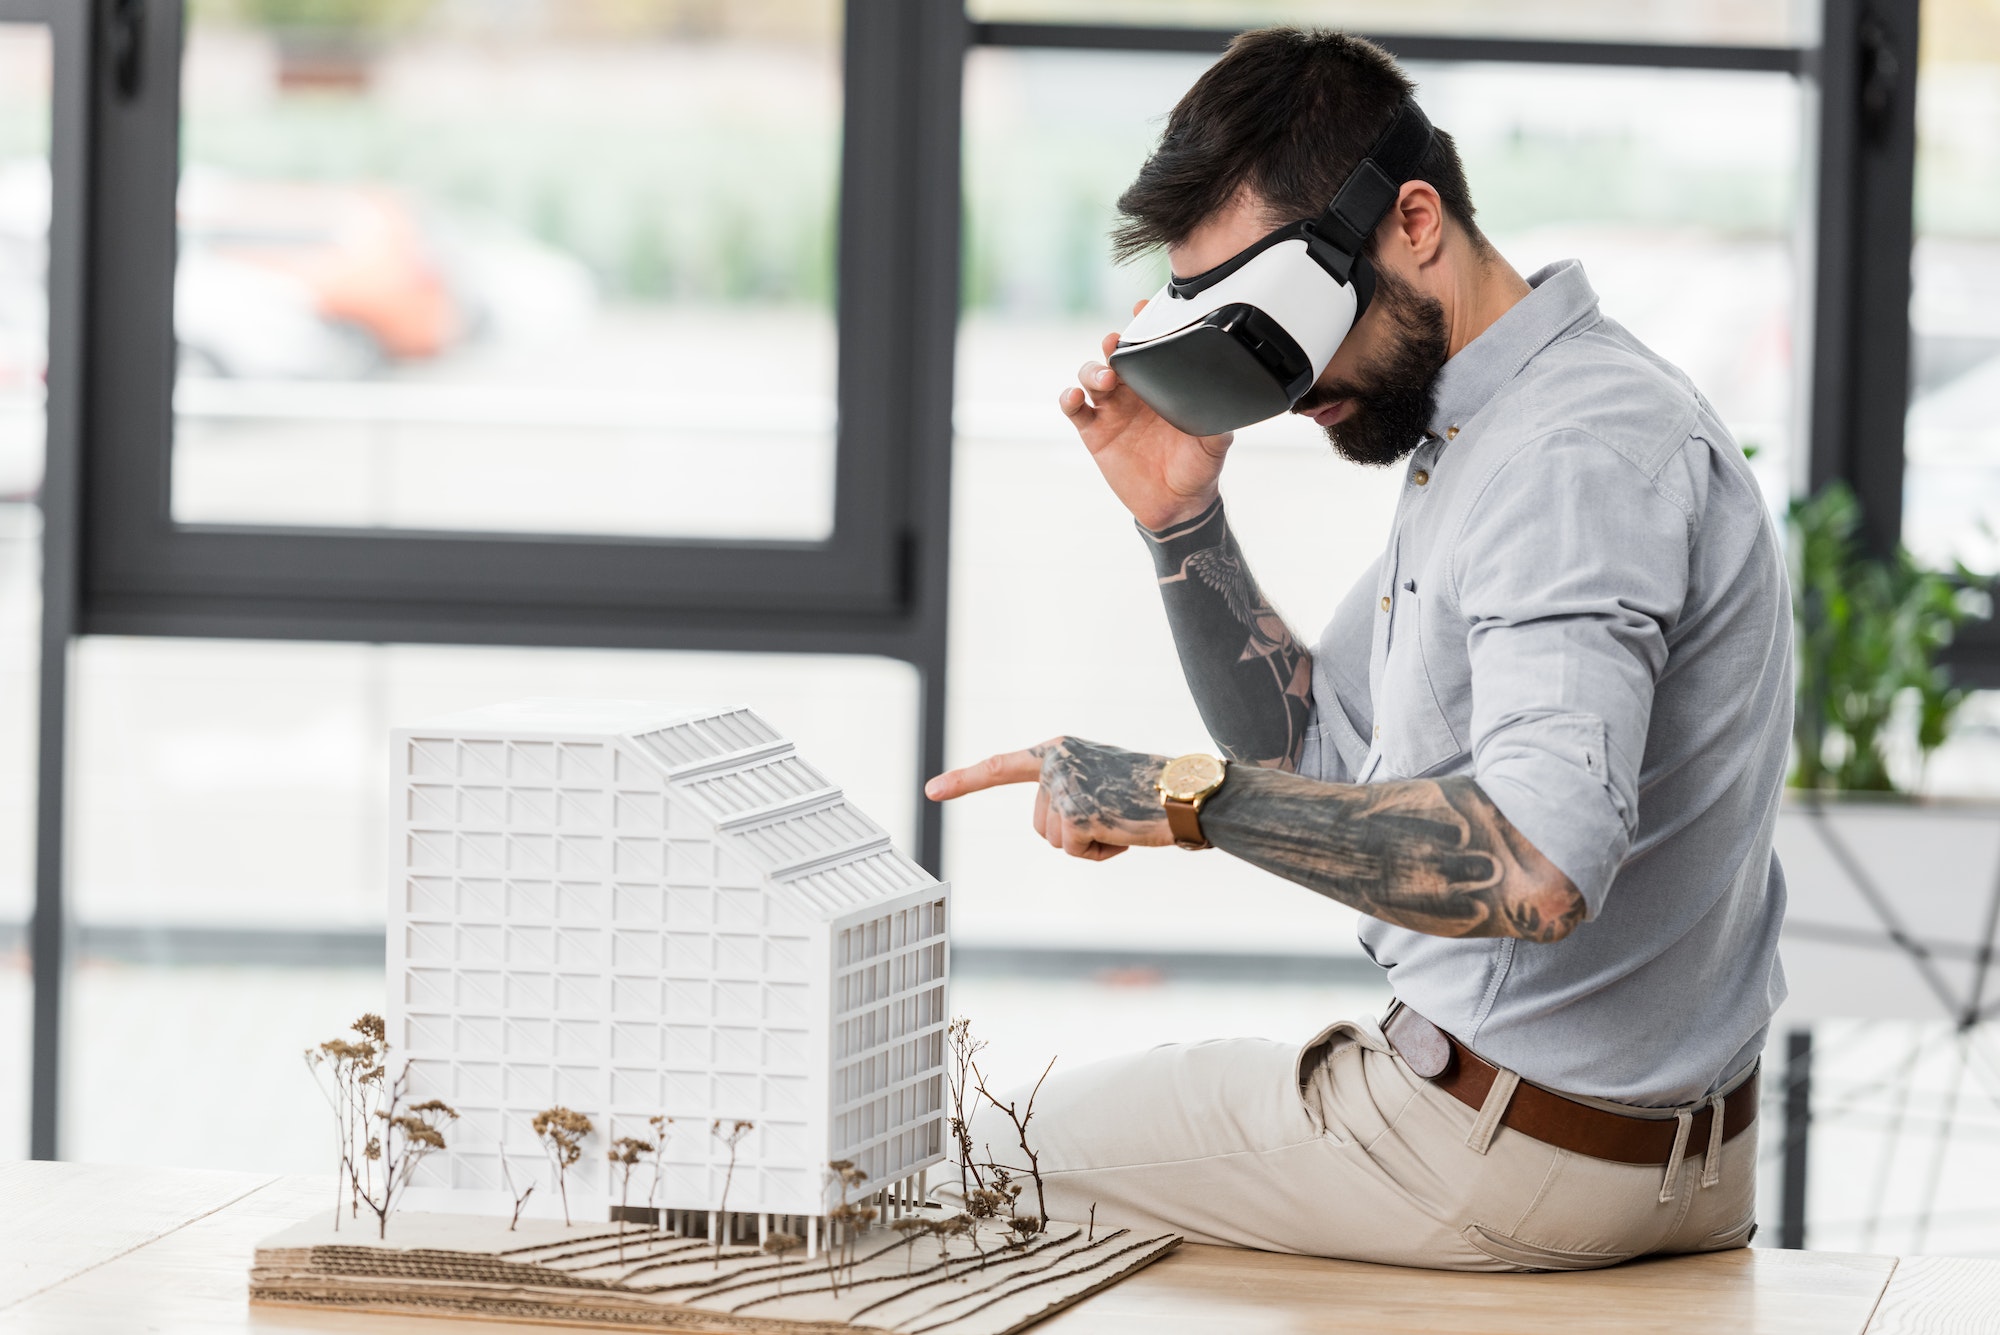 virtual reality architect in virtual reality headset pointing with finger at model of house